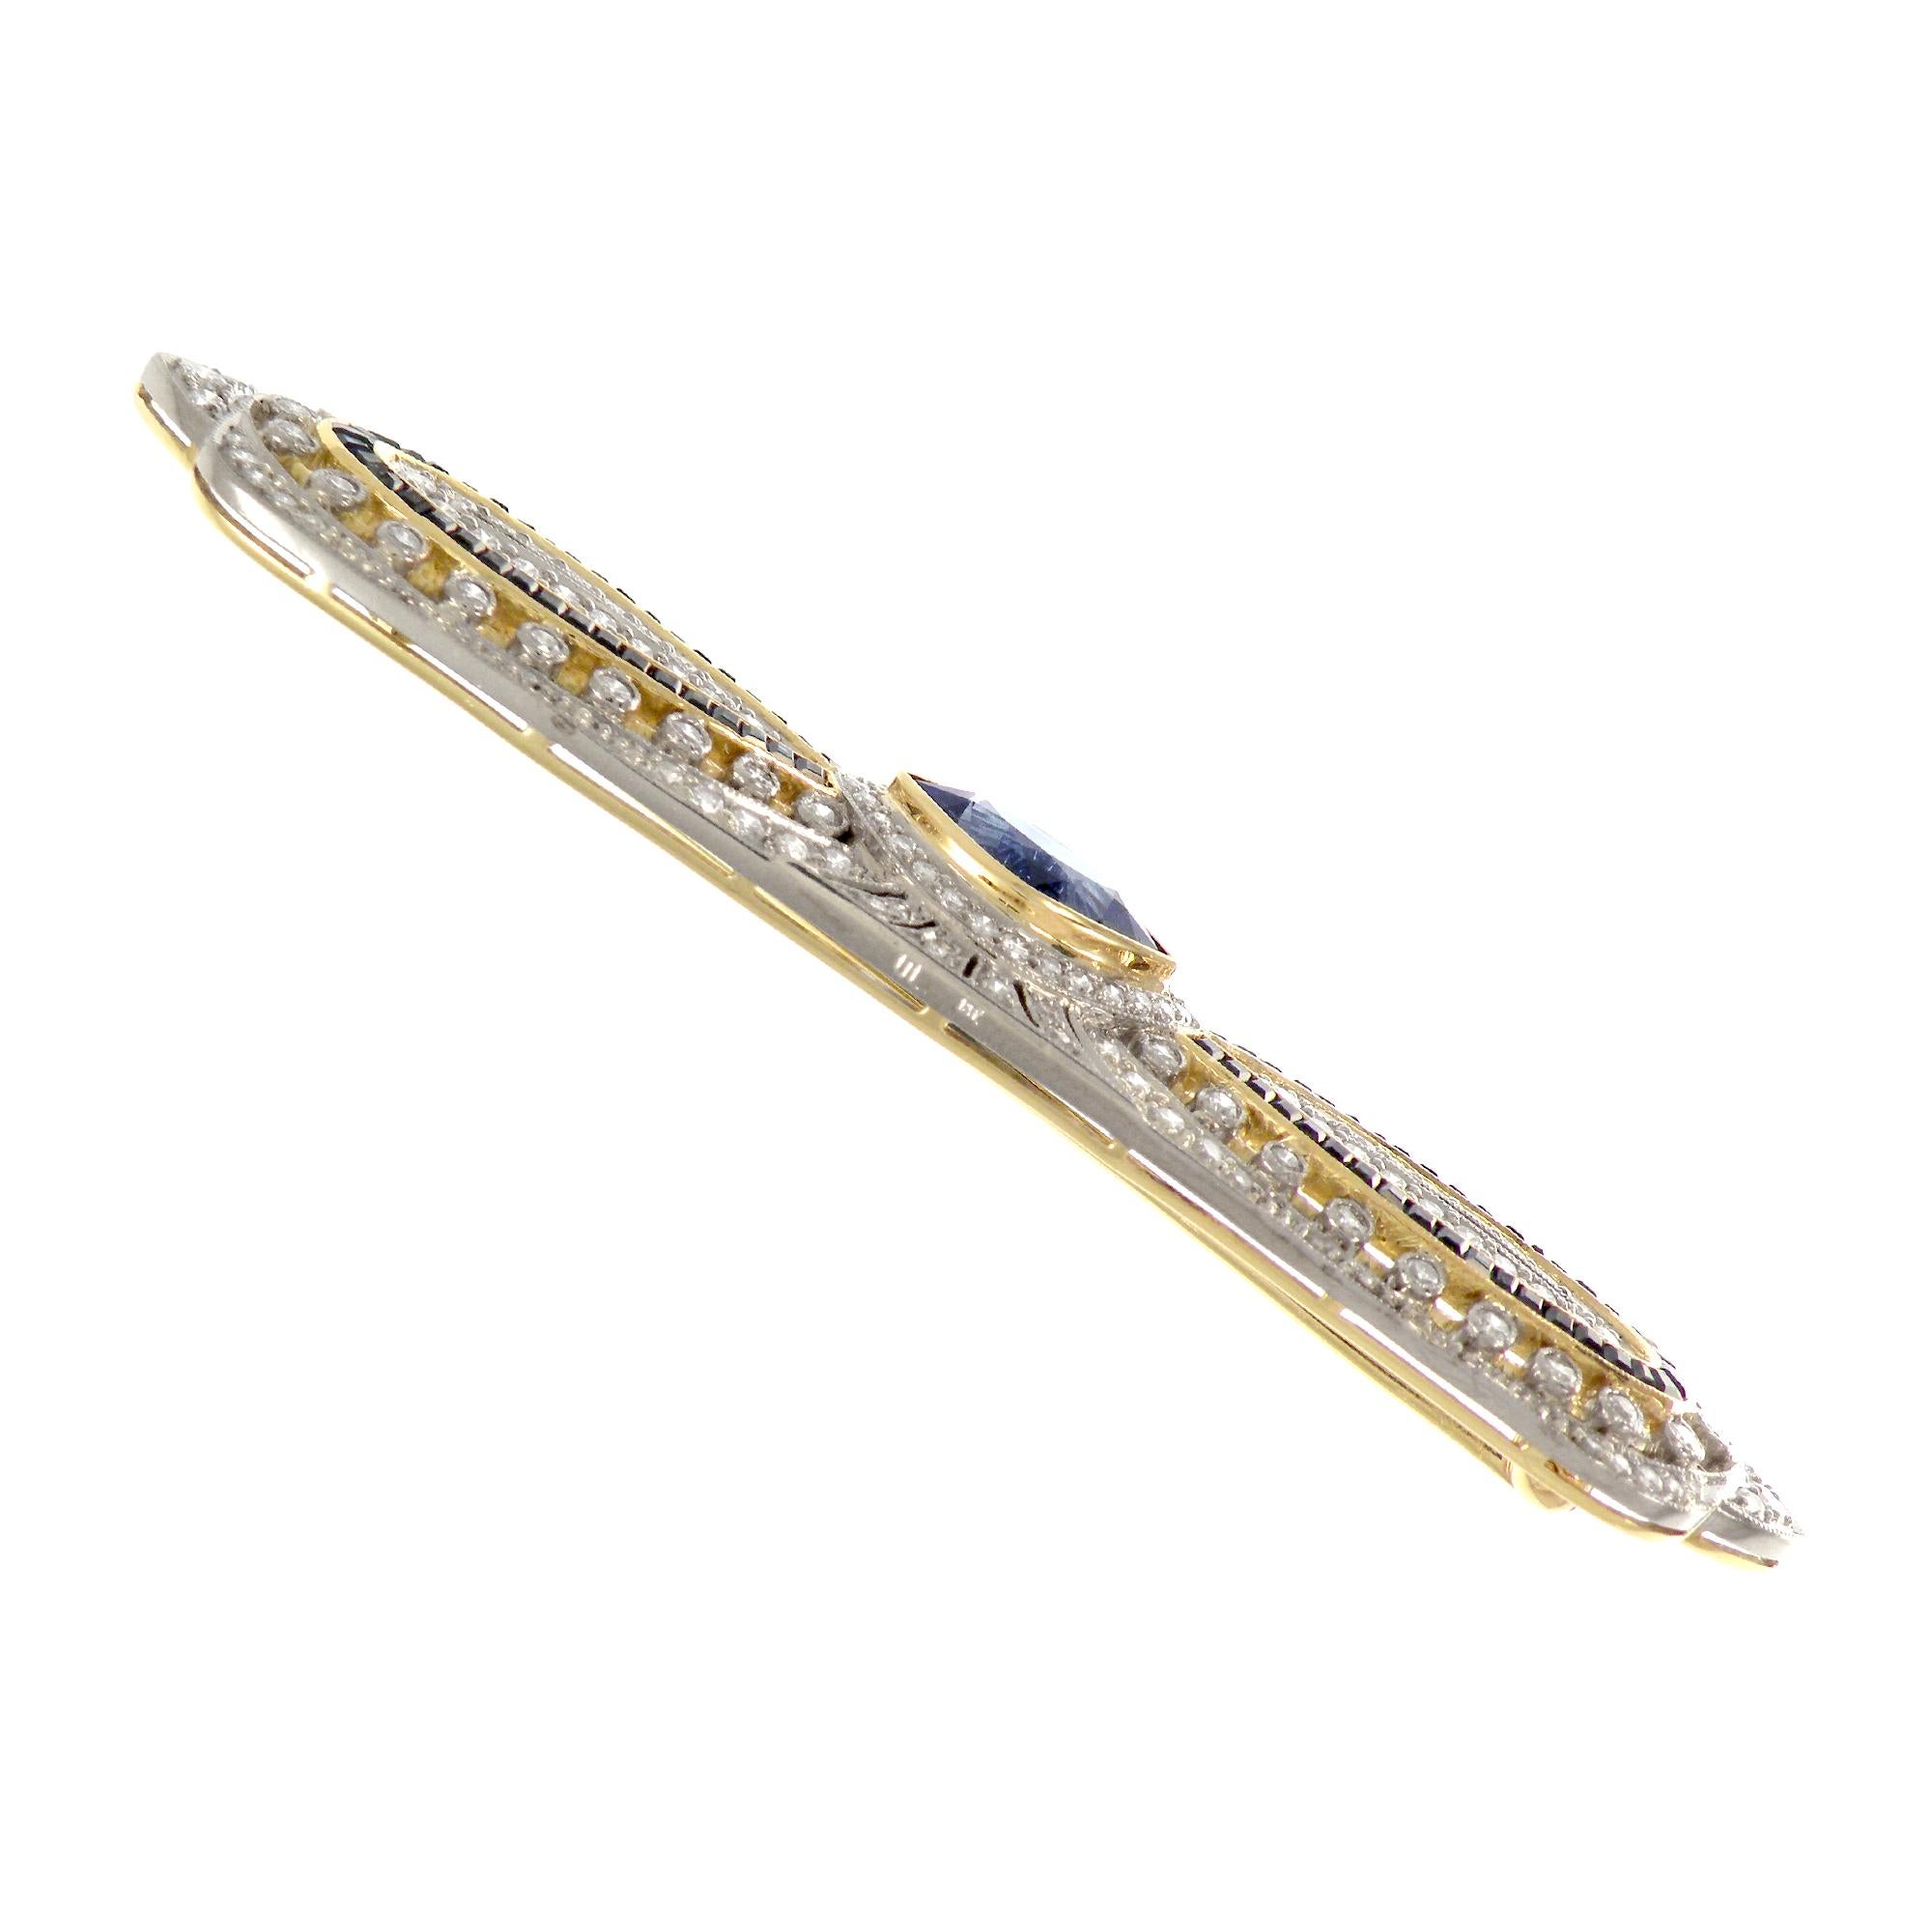 
One-of-a-kind piece, with the beautiful filigree work and fine mill grain setting. This is a two tone brooch handcrafted in 18K Yellow gold and white gold. This brooch features beautiful marquise sapphire of 2.37 carats at the center, 4.71 carats